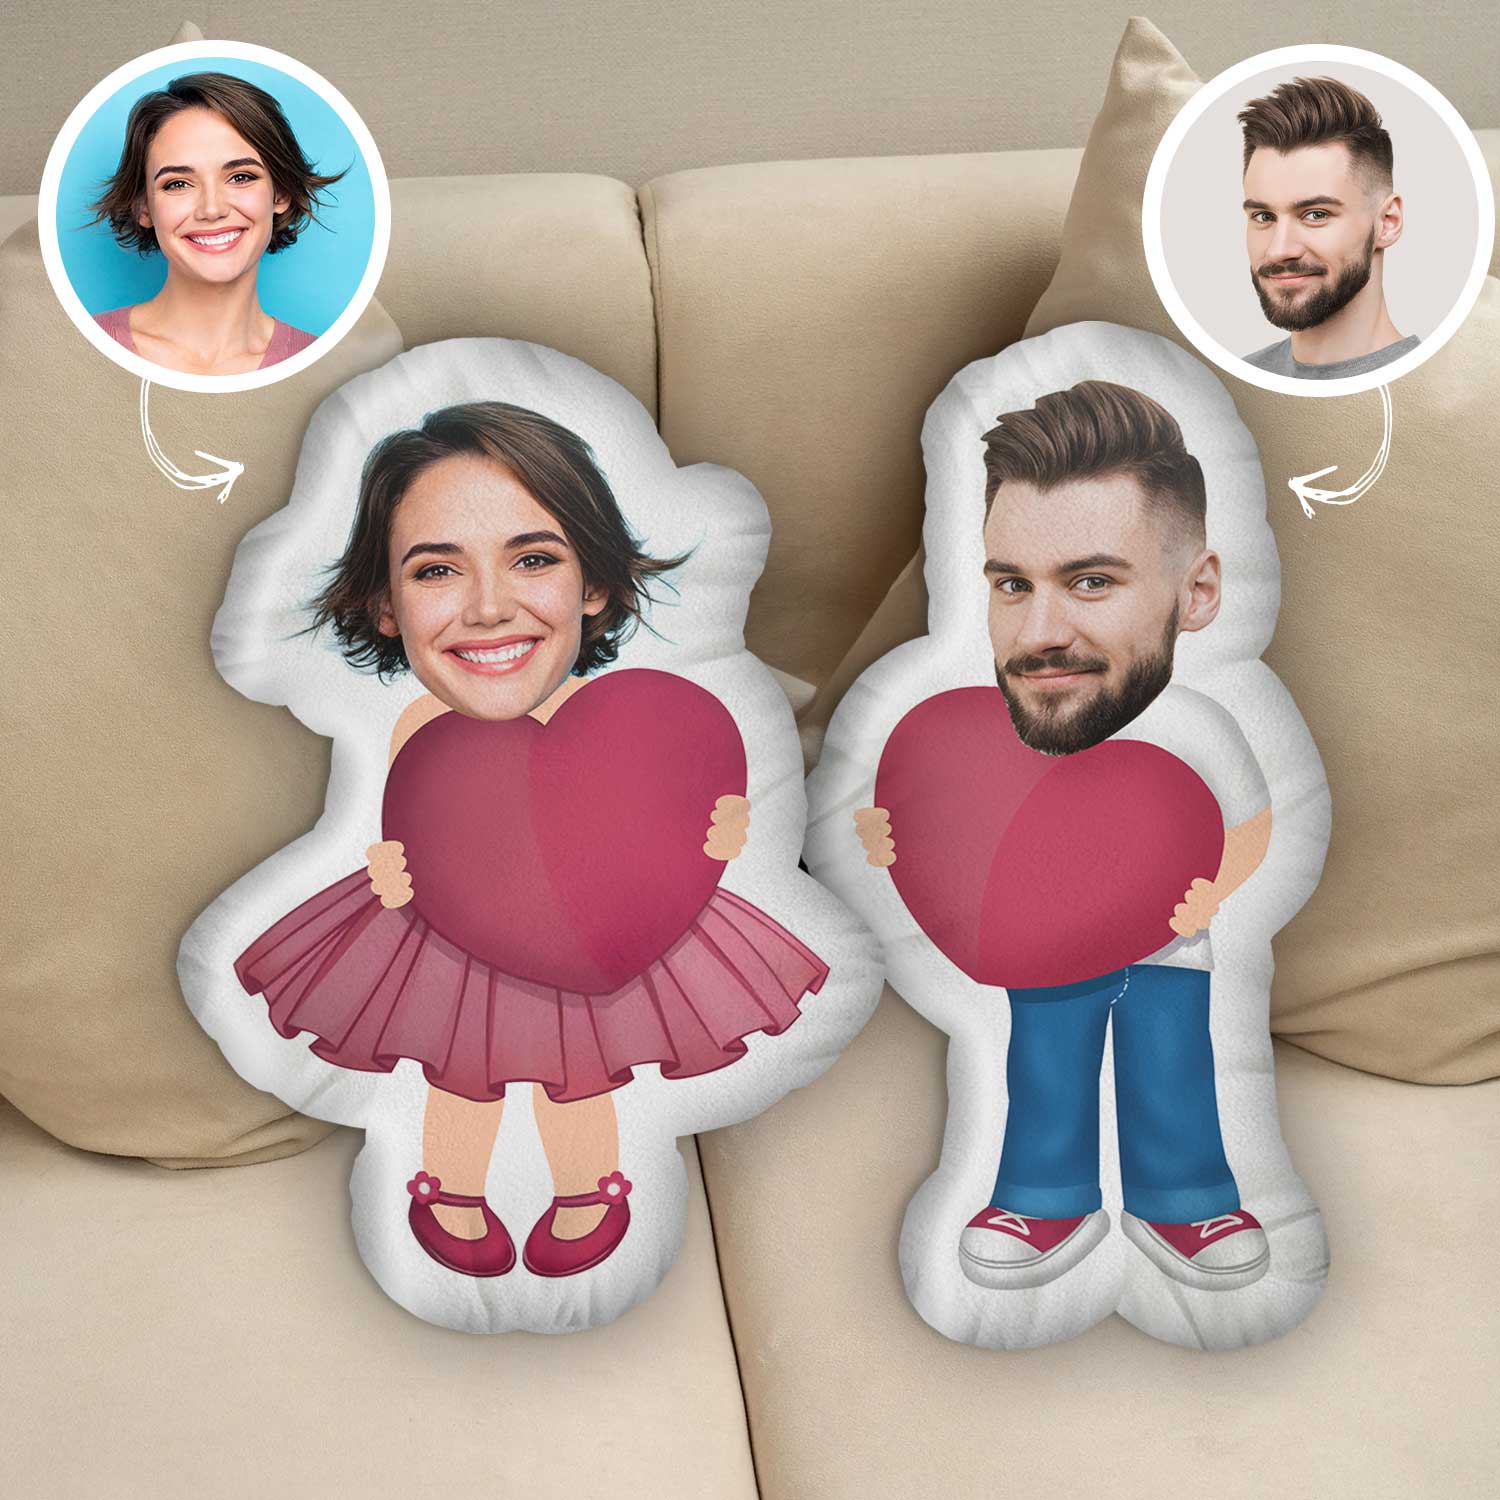 You Have My Heart - Personalized Custom Shape Pillow - Gift For Couple, Boyfriend, Girlfriend, Wife, Husband, Family Members